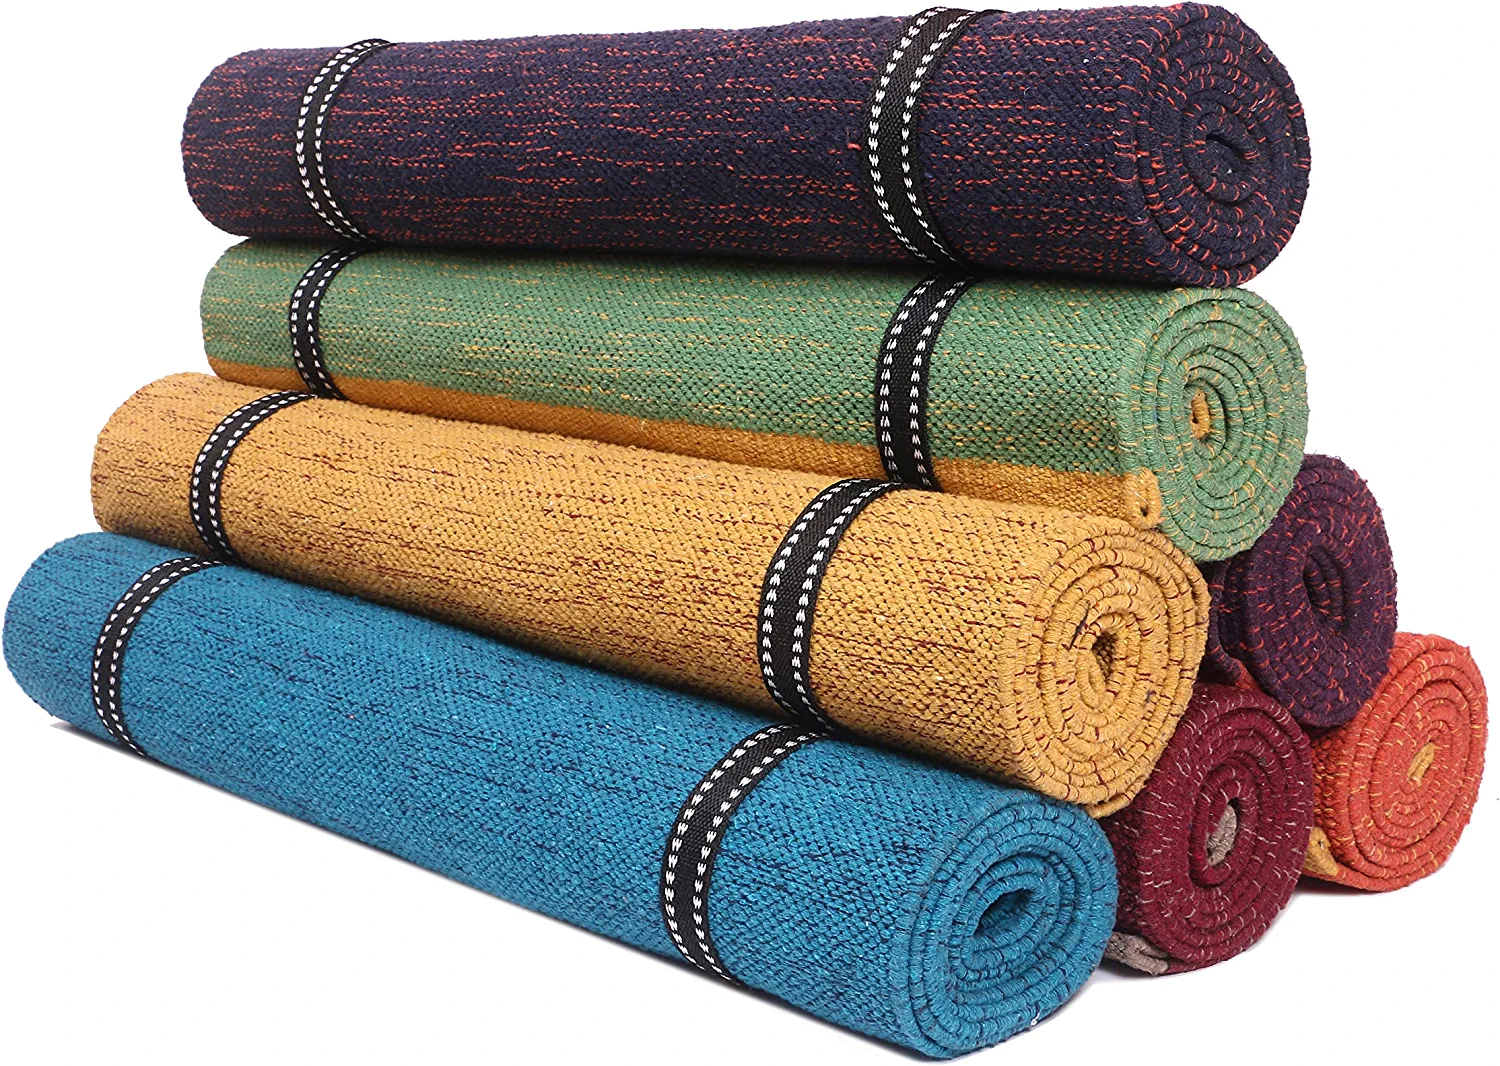 KD Willmax Cotton Yoga Mat Cotton Handmade Organic Cotton Yoga Earth  Natural Elements Yoga Rug Hand Woven Washable 100% Organic Exercise Mat  Highly Absorbent Mat Size 74 x 27 Inch 